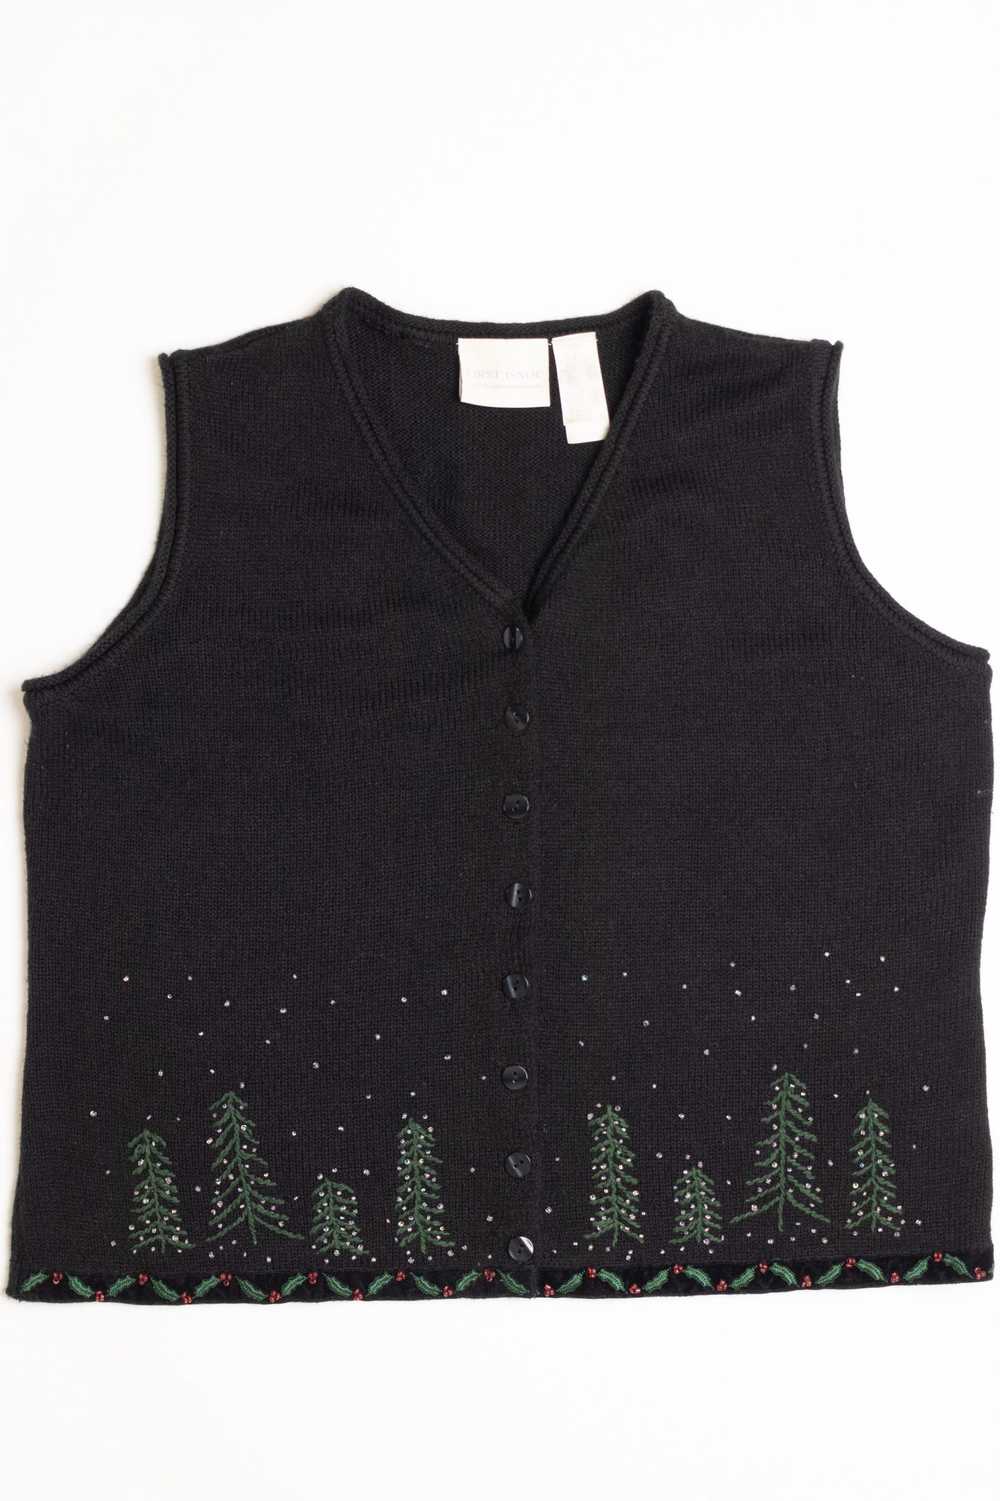 Ugly Christmas Sweater Vest 52 - image 2